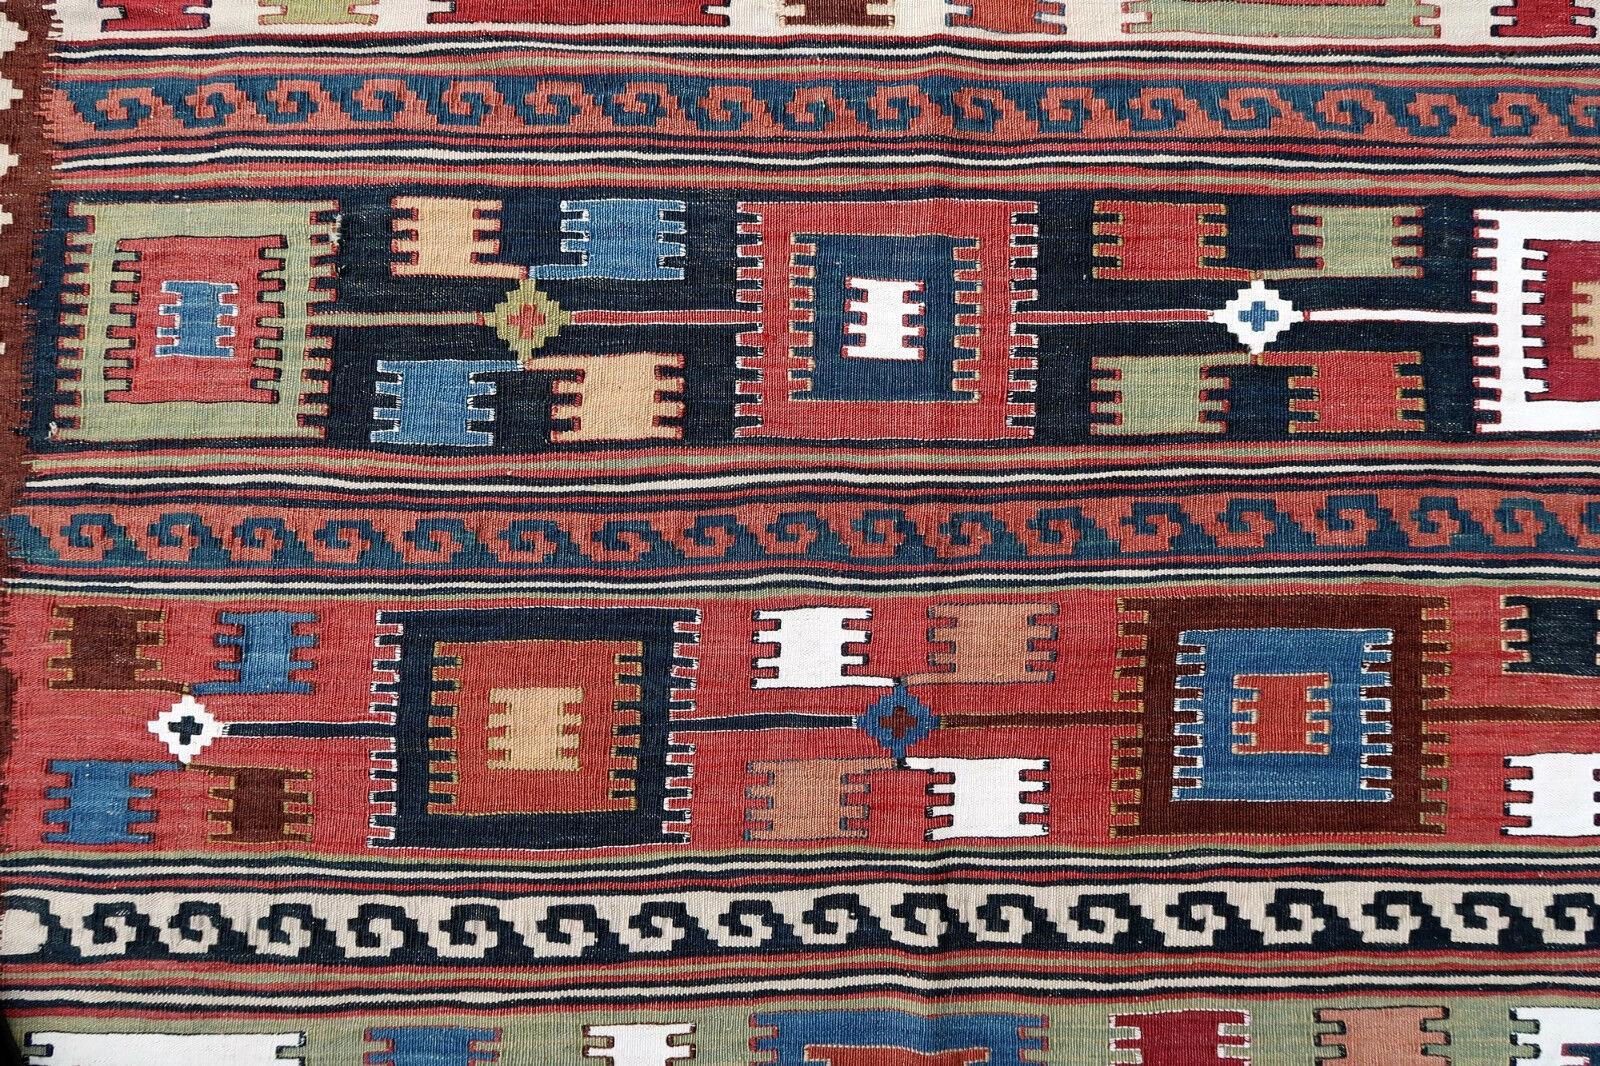 Antique Gashkai kilim from Middle East in colorful shades. The rug is from the beginning of 20th century in original condition.

-condition: original, some signs of age,

-circa: 1900s,

-size: 4.7' x 11.5' (143cm x 350cm),

-material: